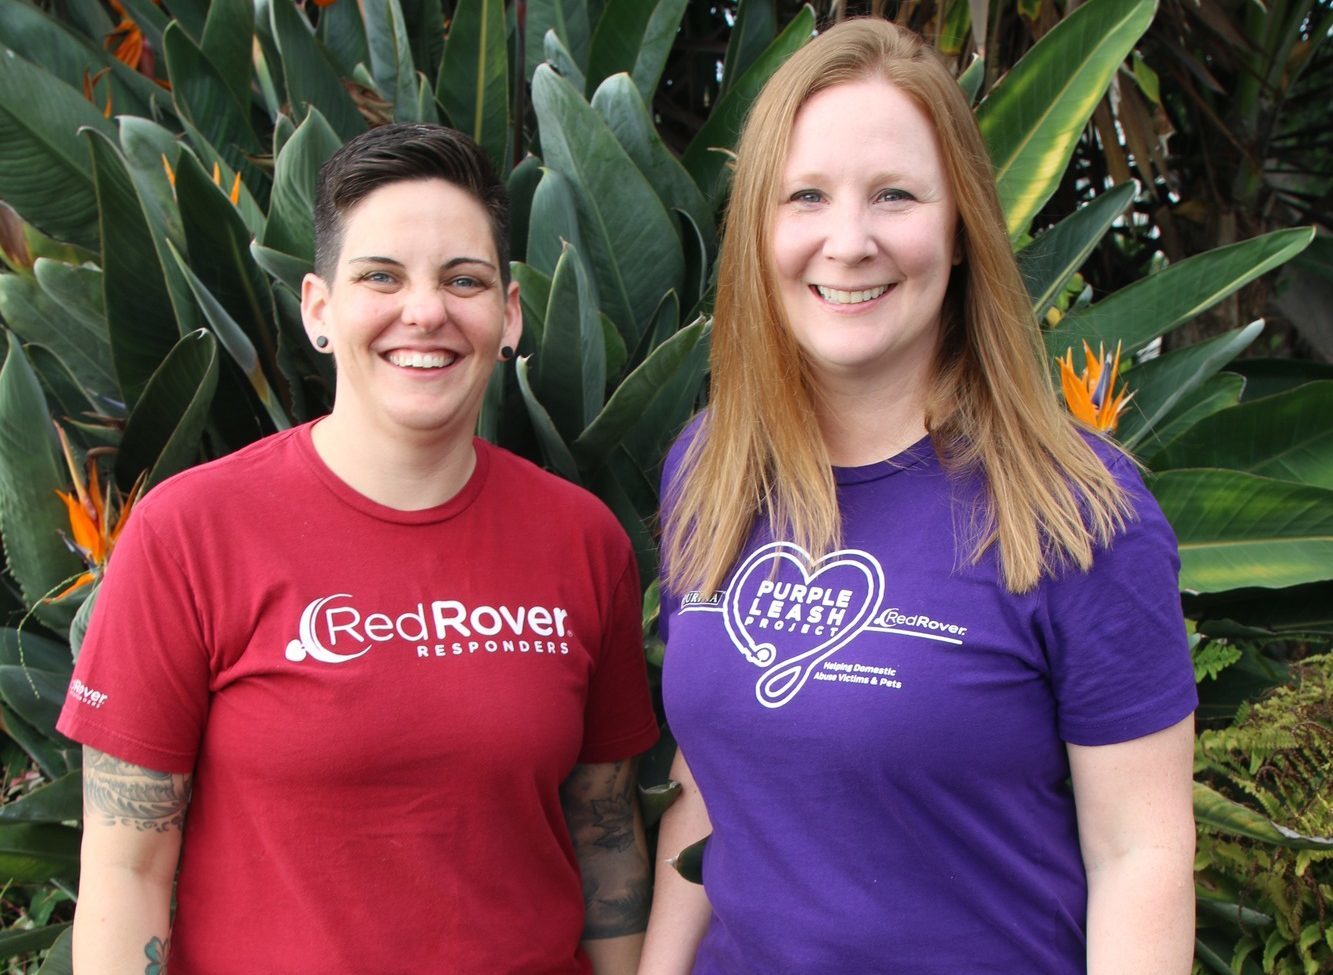 A smiling brunette woman with a cropped haircut wearing a red t-shirt that has the RedRover logo on the chest stands besides a smiling blonde woman wearing a purple tshirt with the Purple Leash Project logo on the chest.